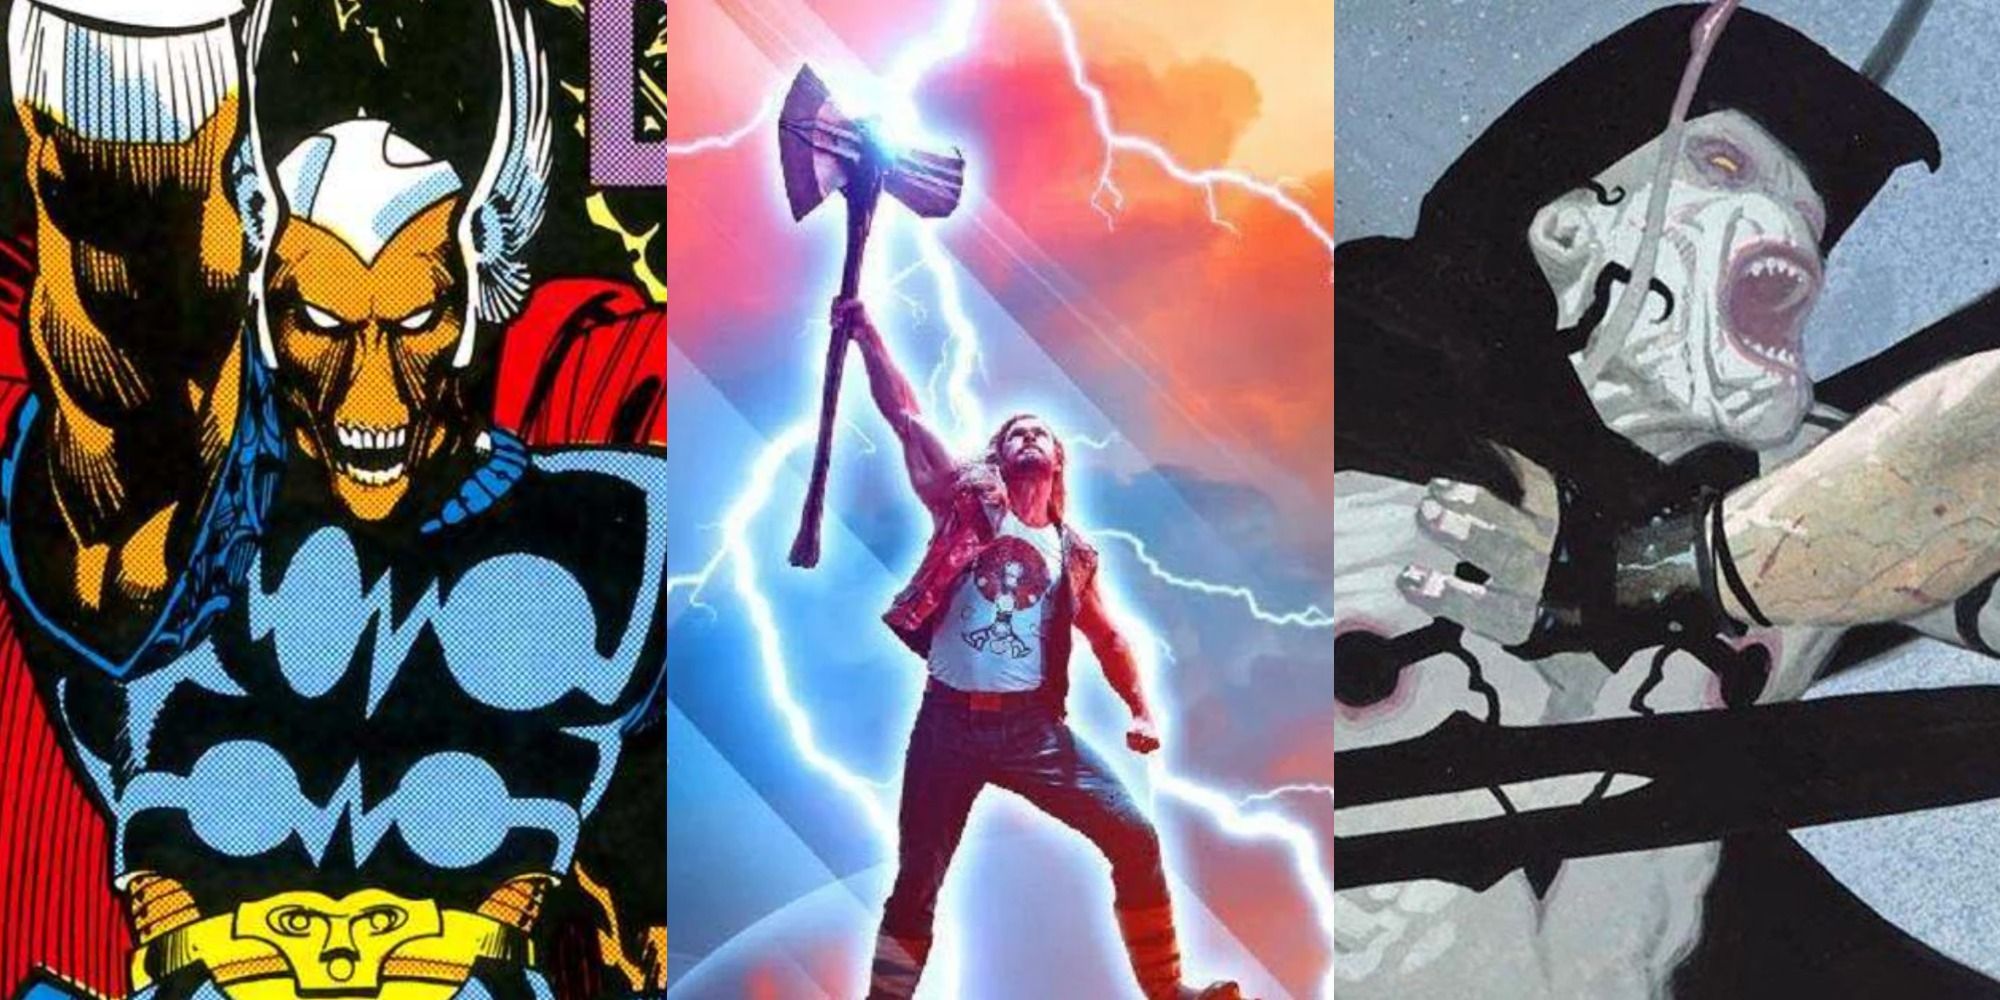 Split image of Beta Ray Bill from Marvel Comics, Thor from Thor: Love and Thunder poster, and Gorr the God Butcher from Marvel Comics.